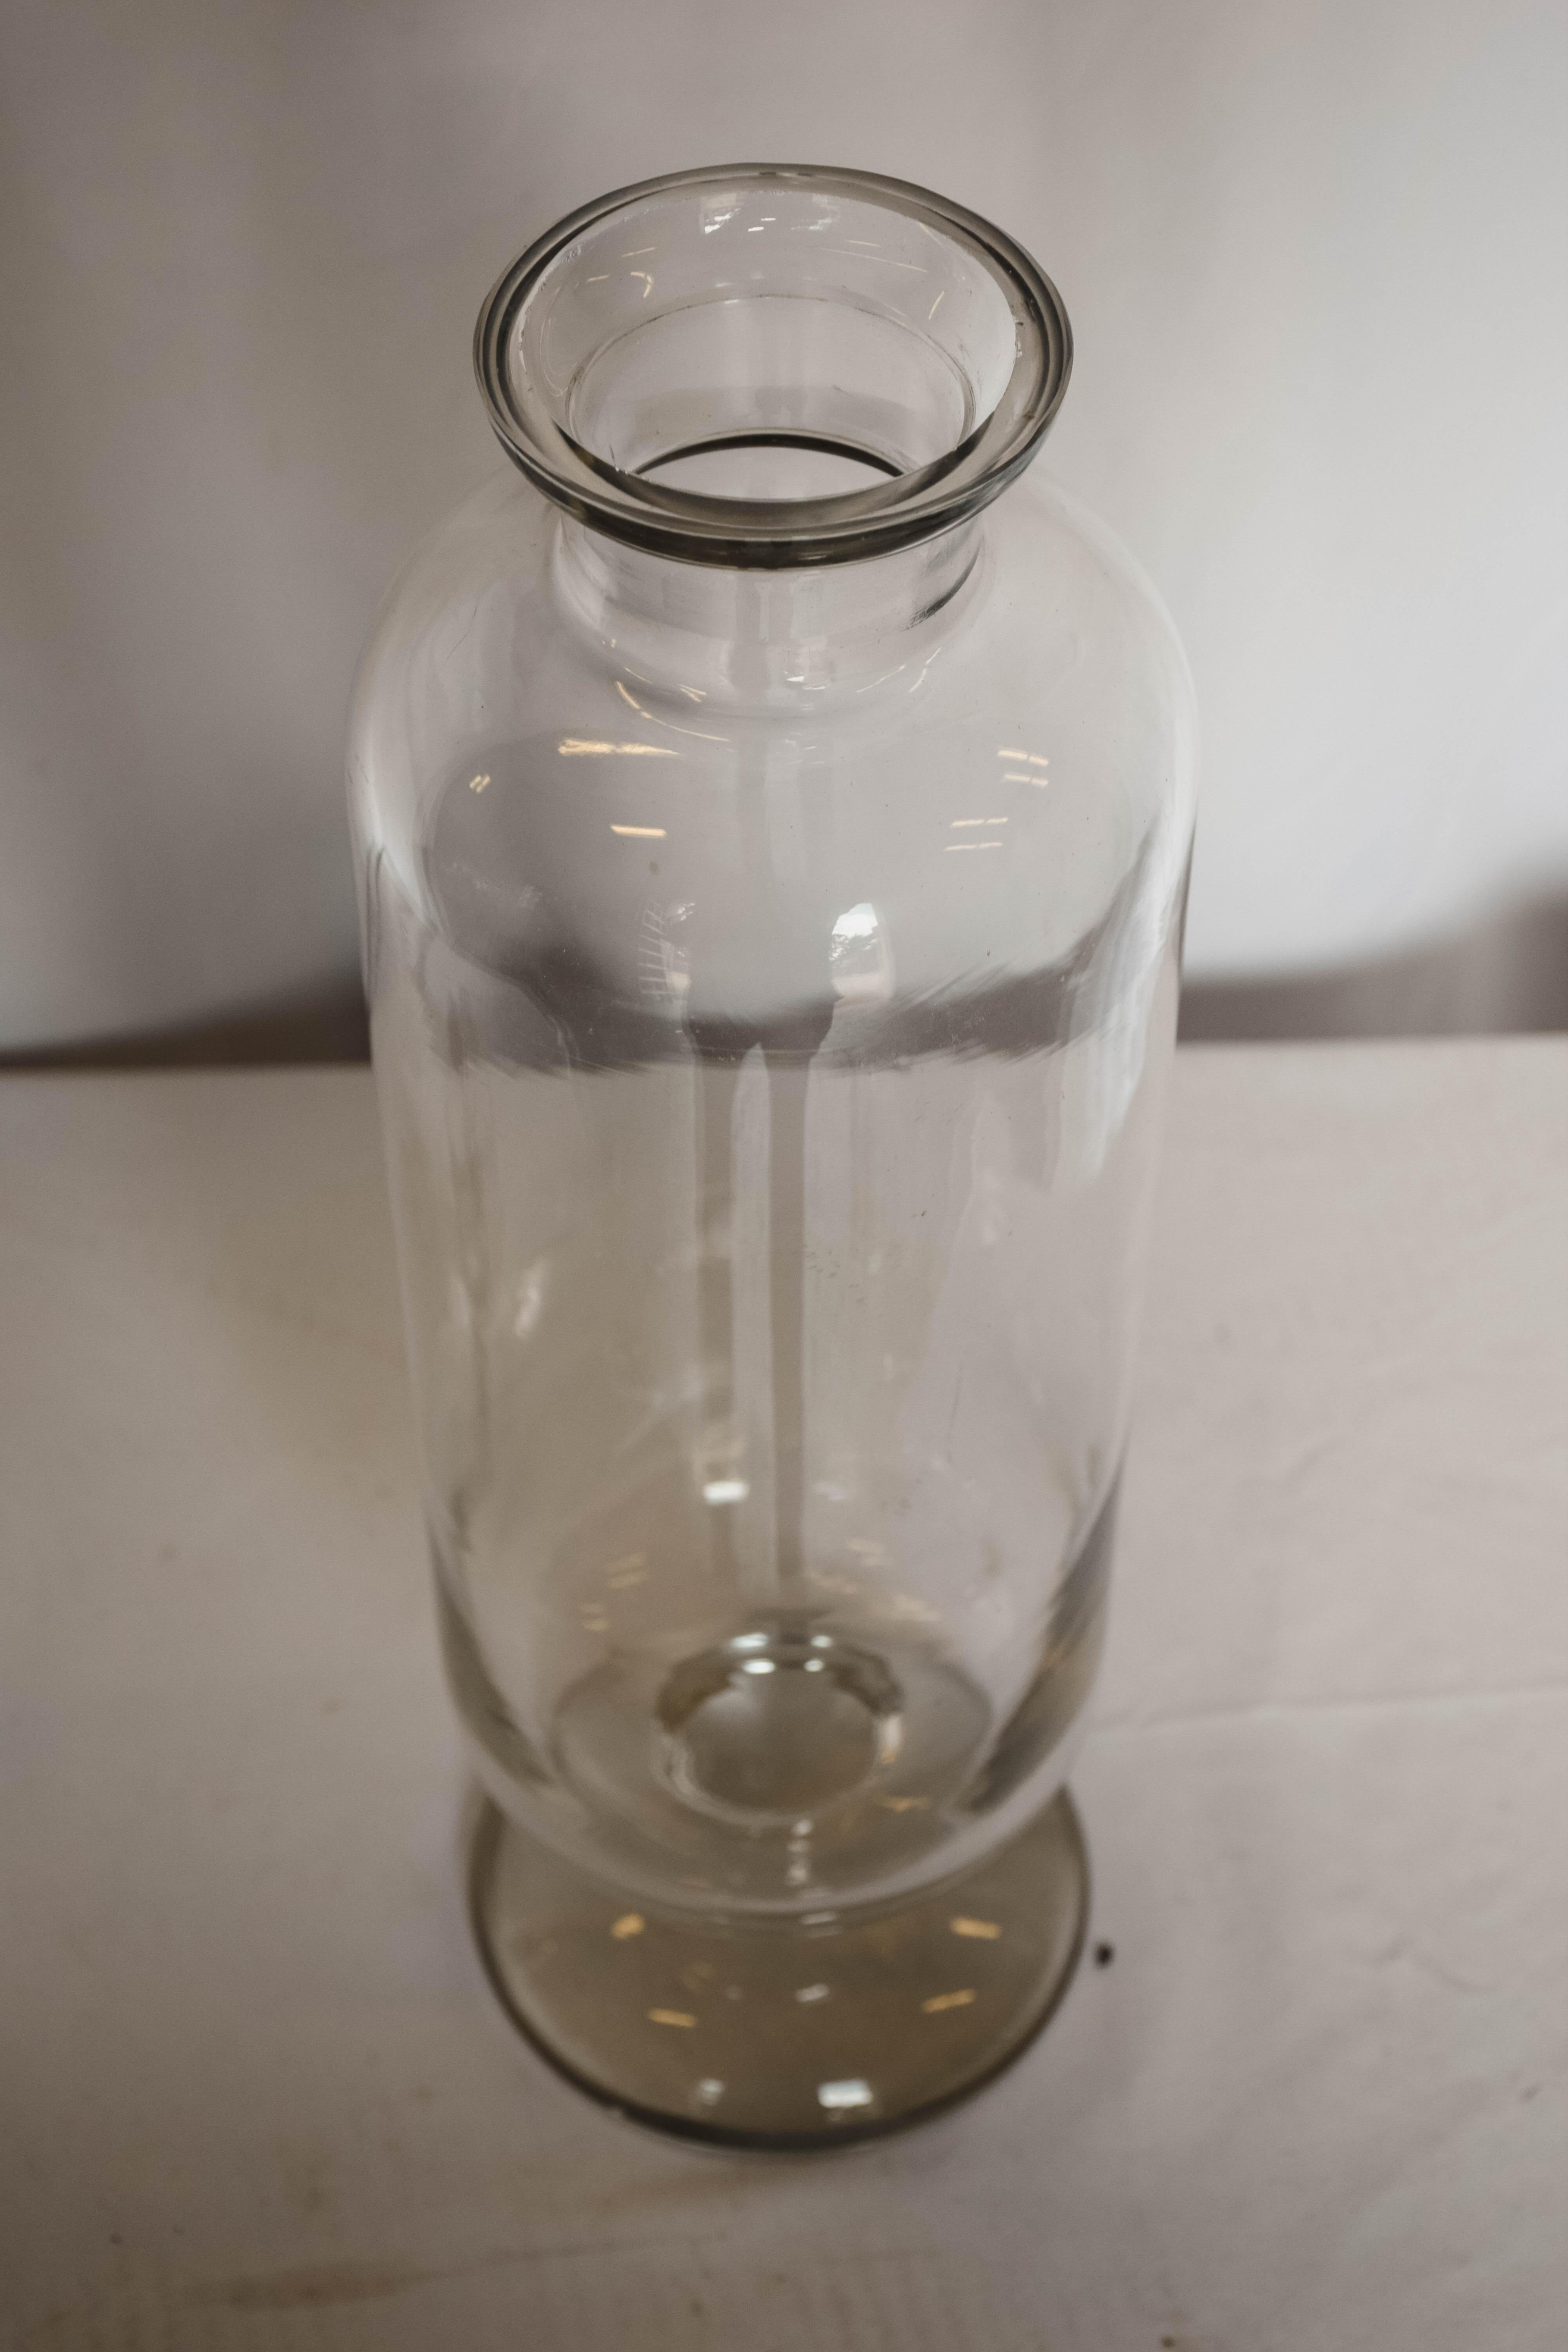 A cylindrical glass candy jar, with a lid and rounded bottom. Top is a linear cut bevel in the shape of a diamond. Truly gorgeous and useful. Use it for cookies and candies in the kitchen or aside a tub with your favorite bath salts.